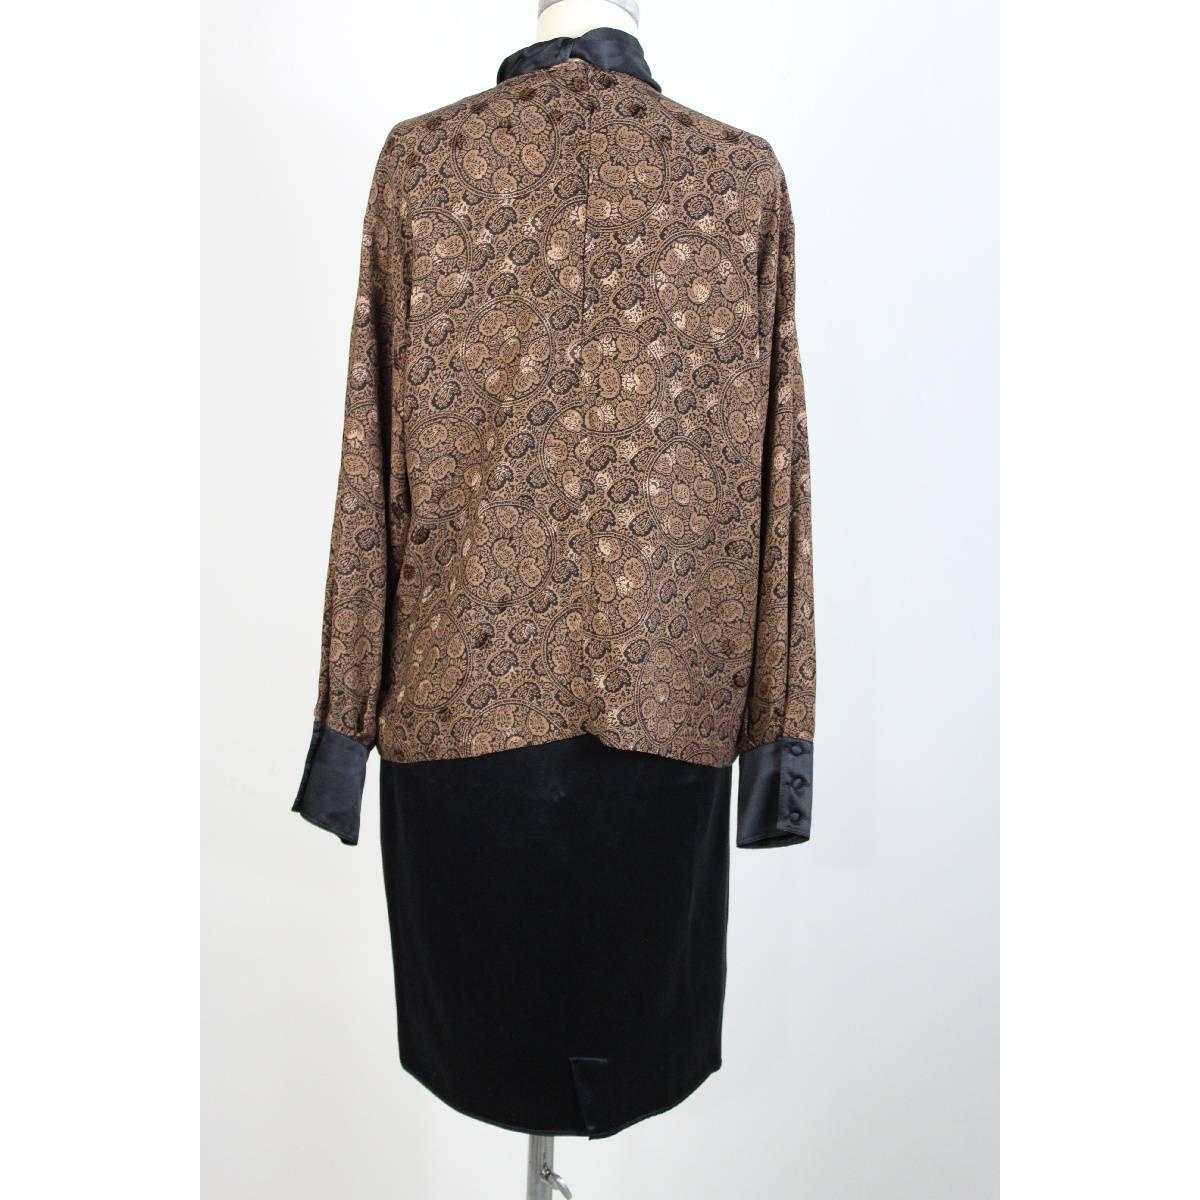 Genny by Gianni Versace, vintage black and brown paisley silk suit skirt, shirt has high neck closed with a soft ribbon, long sleeve, excellent condition.

Size 44 IT; 10 US; 12 UK
measurements
Shoulder: 44 cm
Ascelle: 58 cm
Sleeve: 60cm
Length: 65